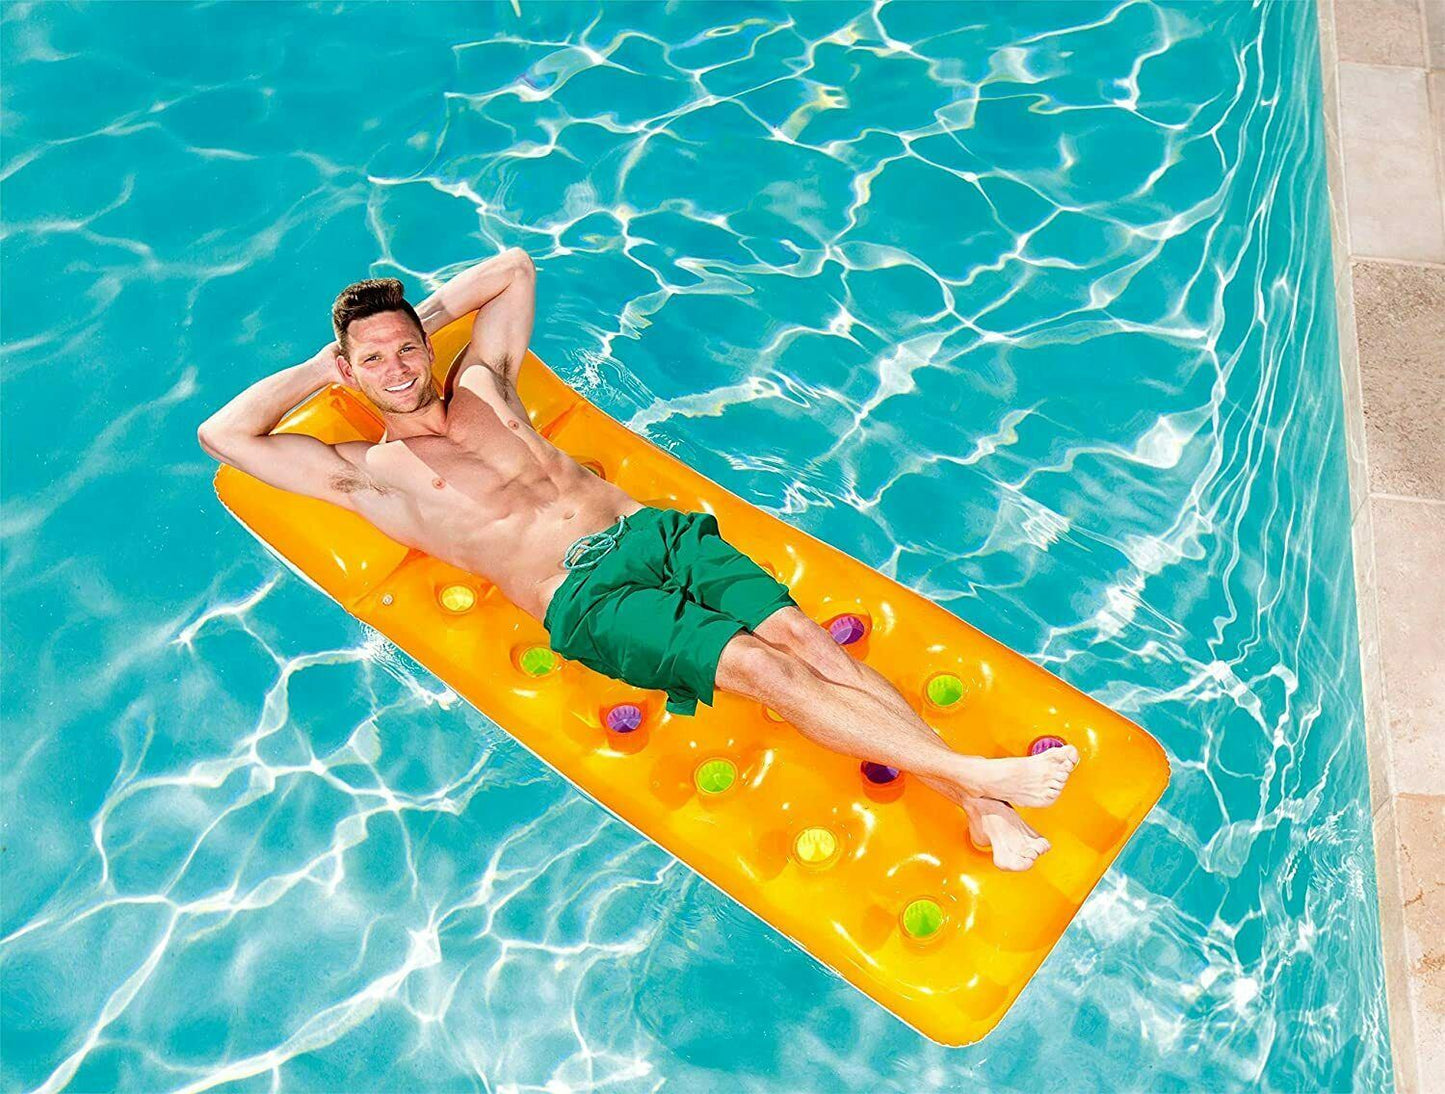 Inflatable Pocket Fashion Lounger by Bestway - UKBuyZone